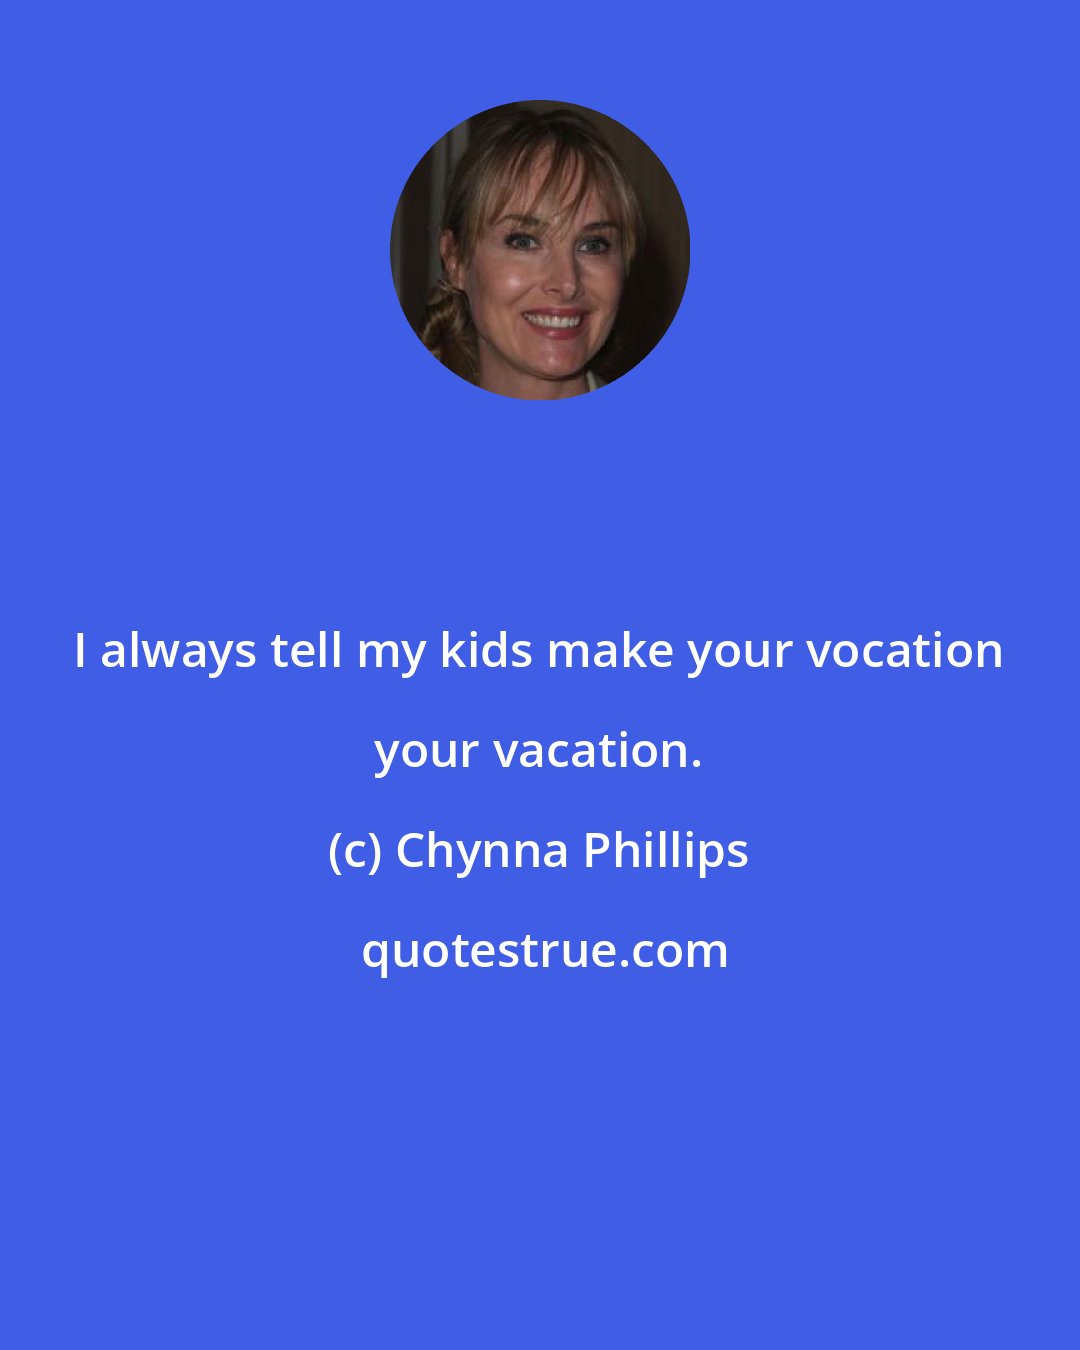 Chynna Phillips: I always tell my kids make your vocation your vacation.